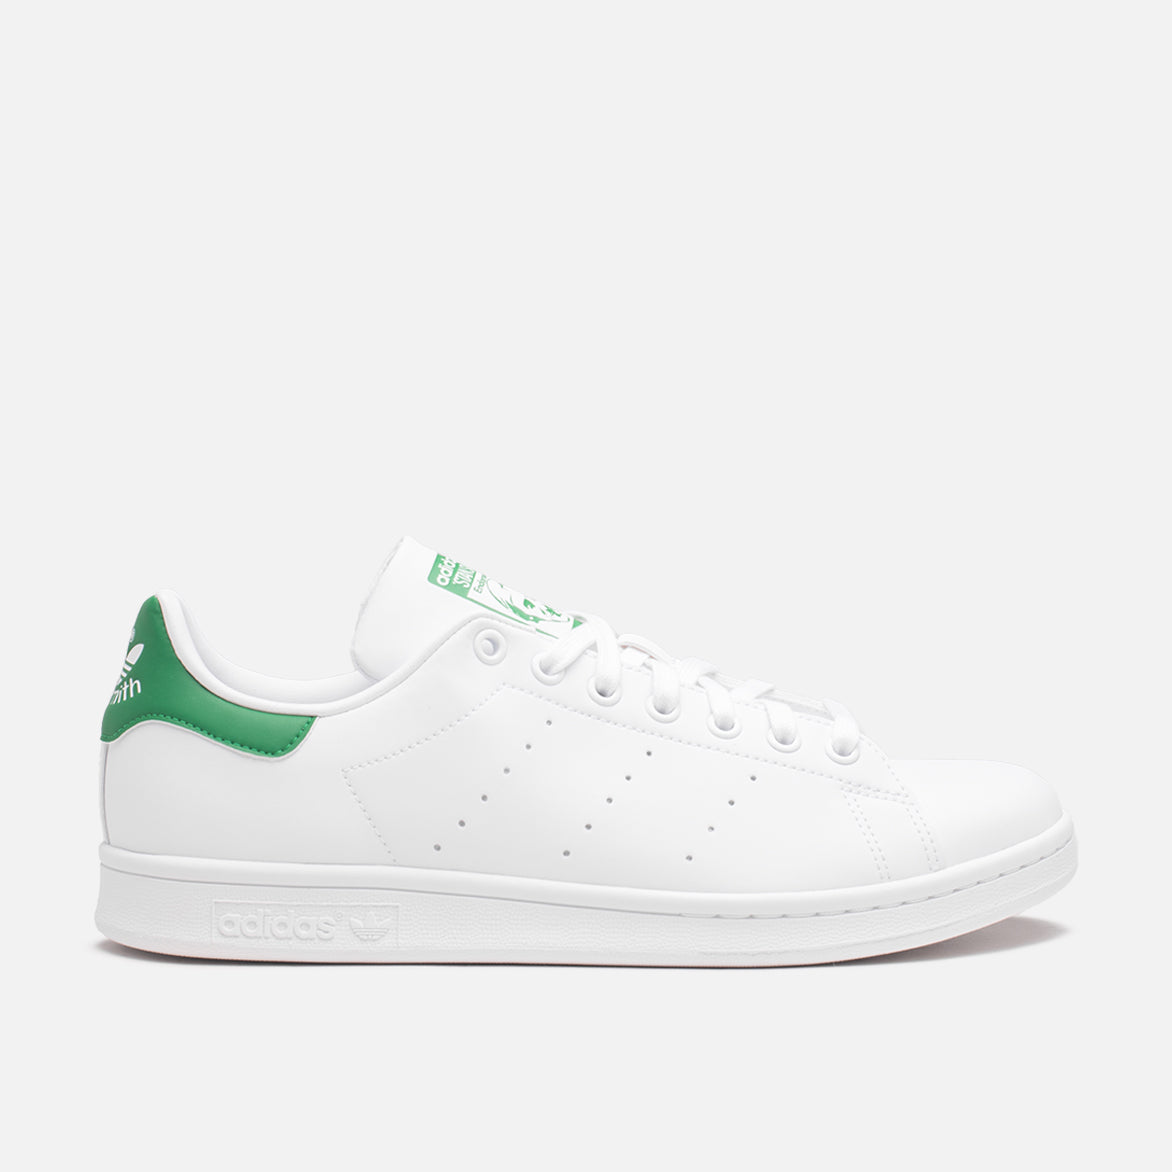 SMITH CLOUD WHITE / GREEN | lapstoneandhammer.com